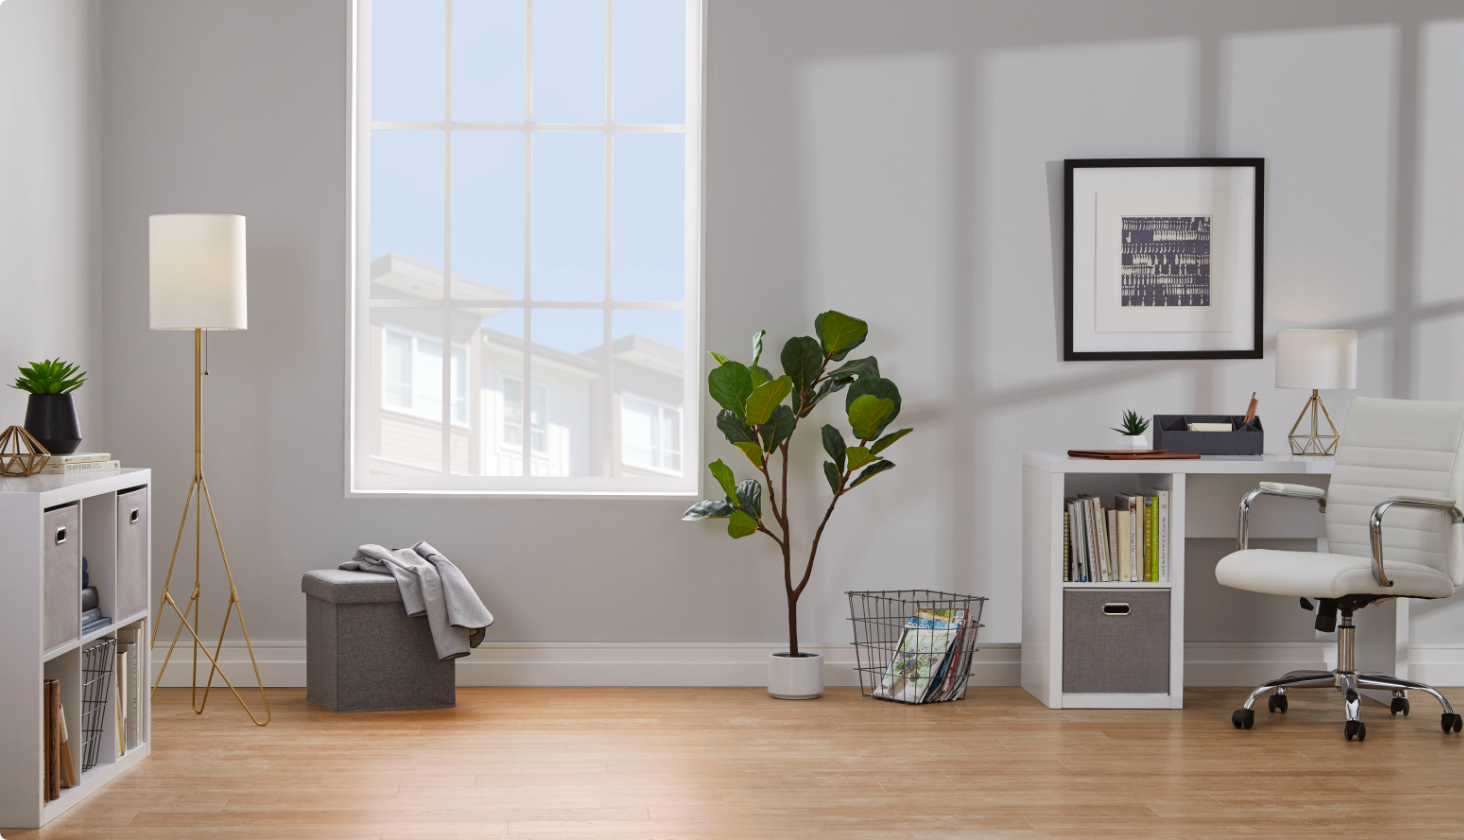 Home office with white chair, desk, floor potted plant, floor lamp and decor